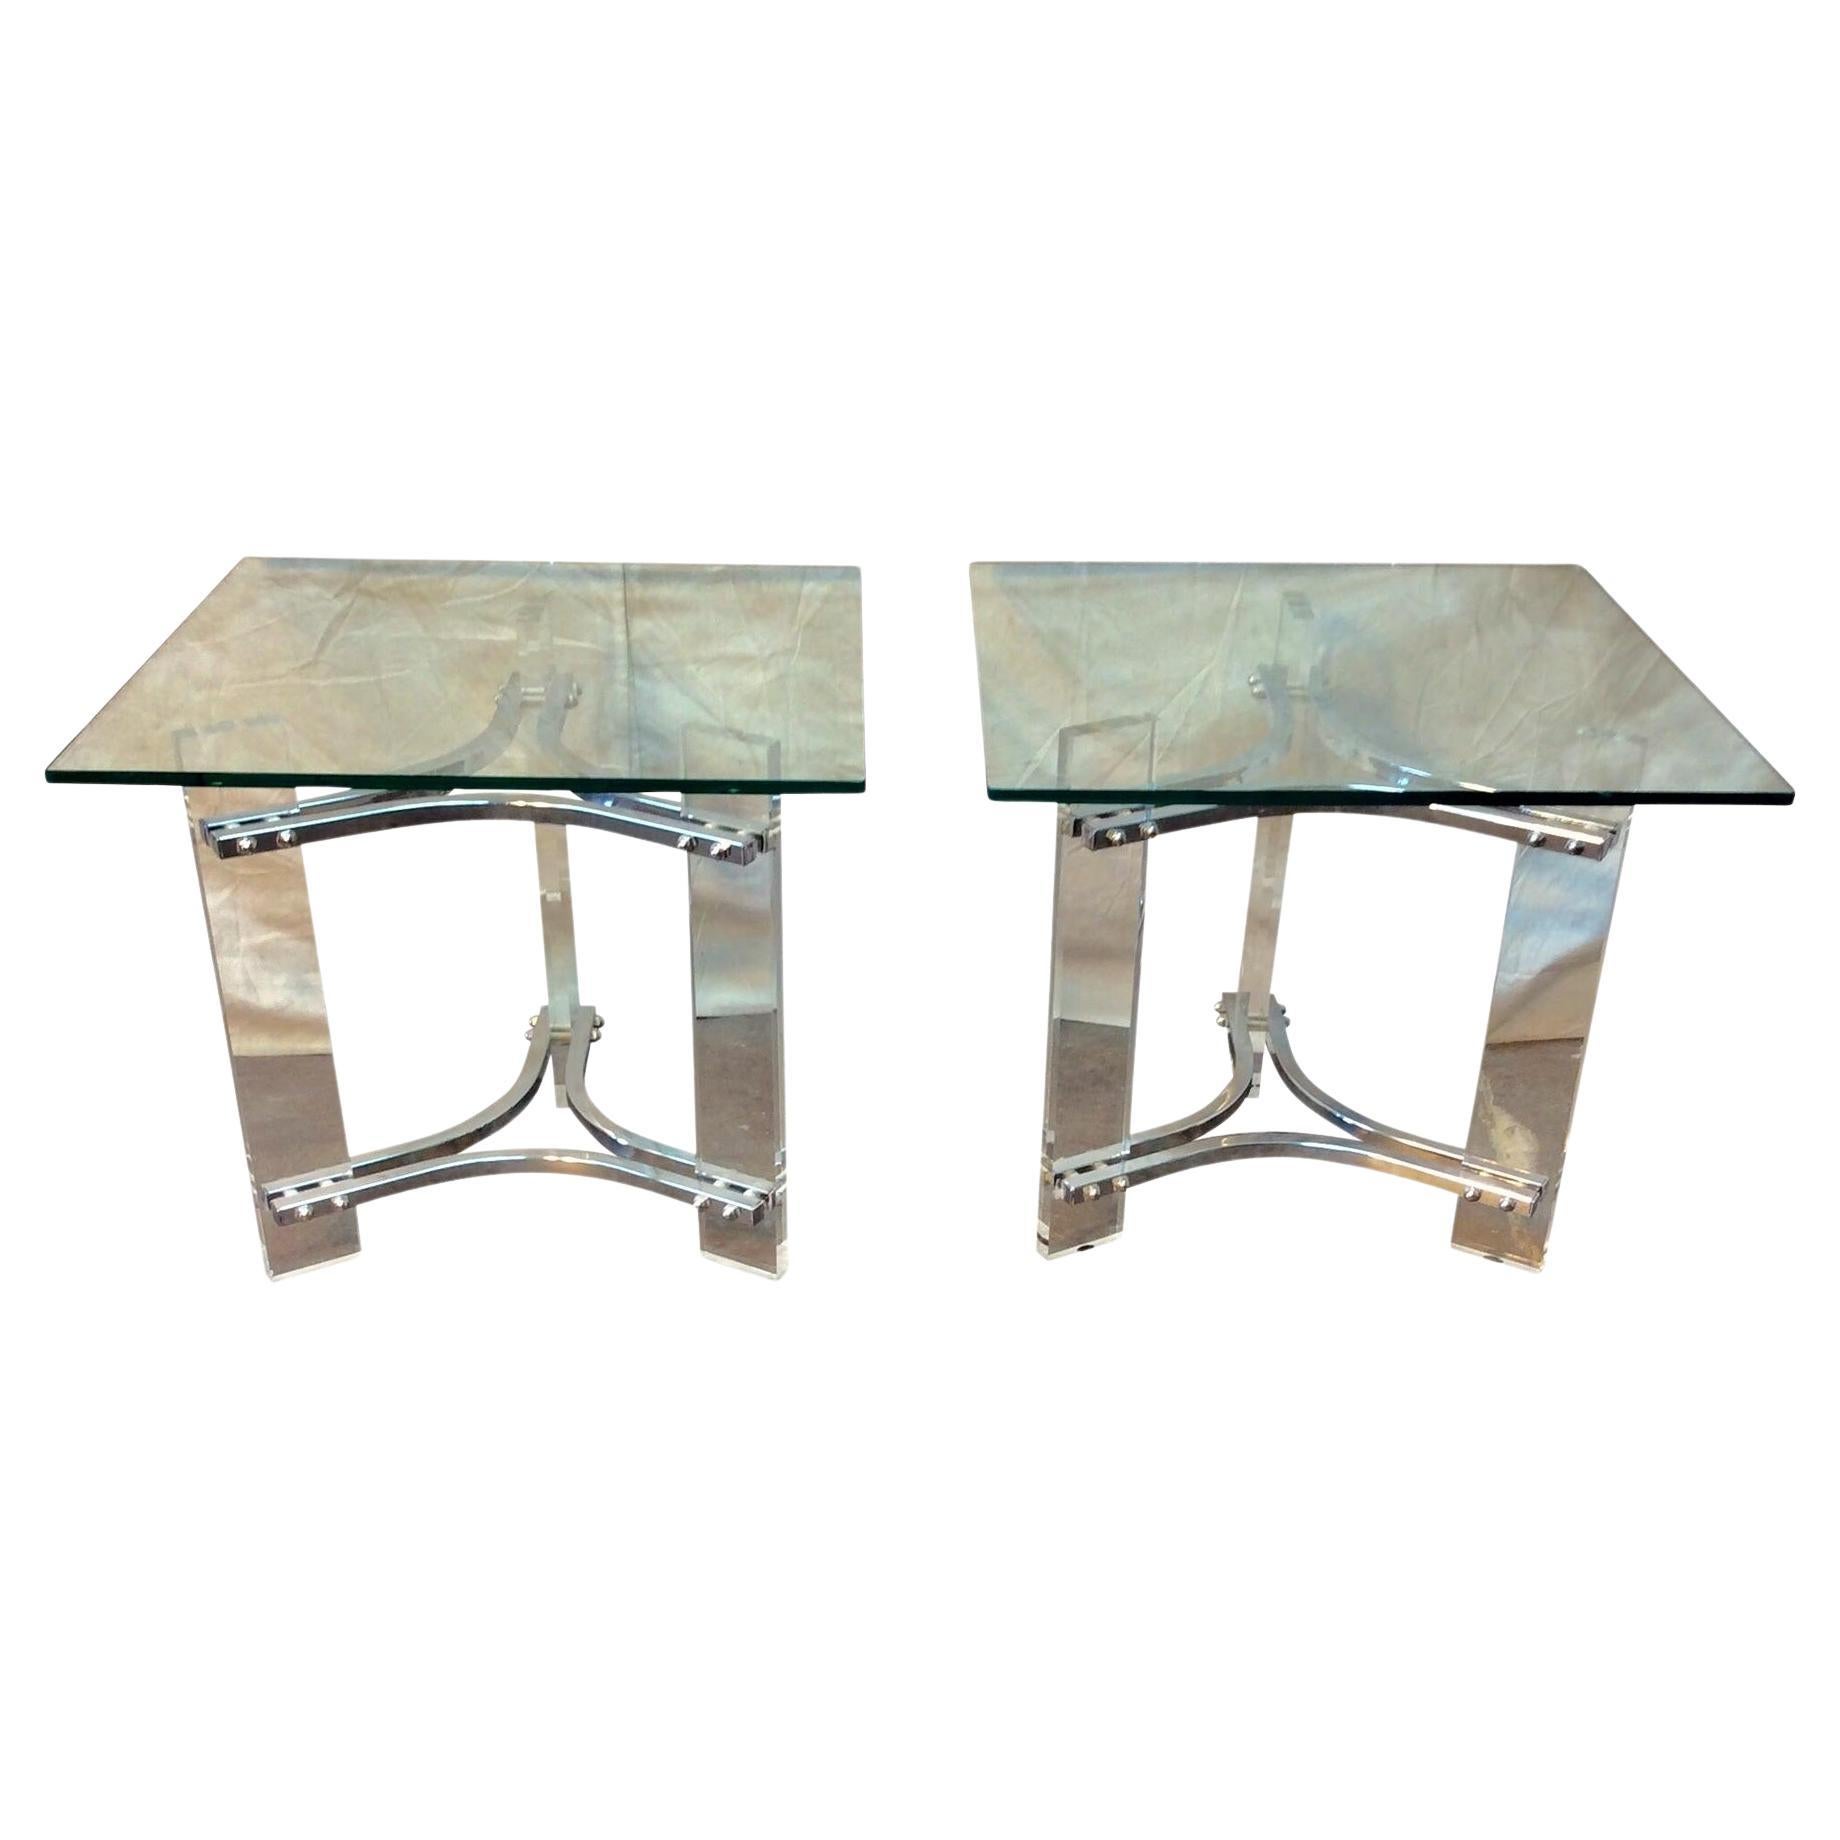  Mid-Century Modern Sculptural Lucite Chrome and Glass Side Tables - a Pair For Sale